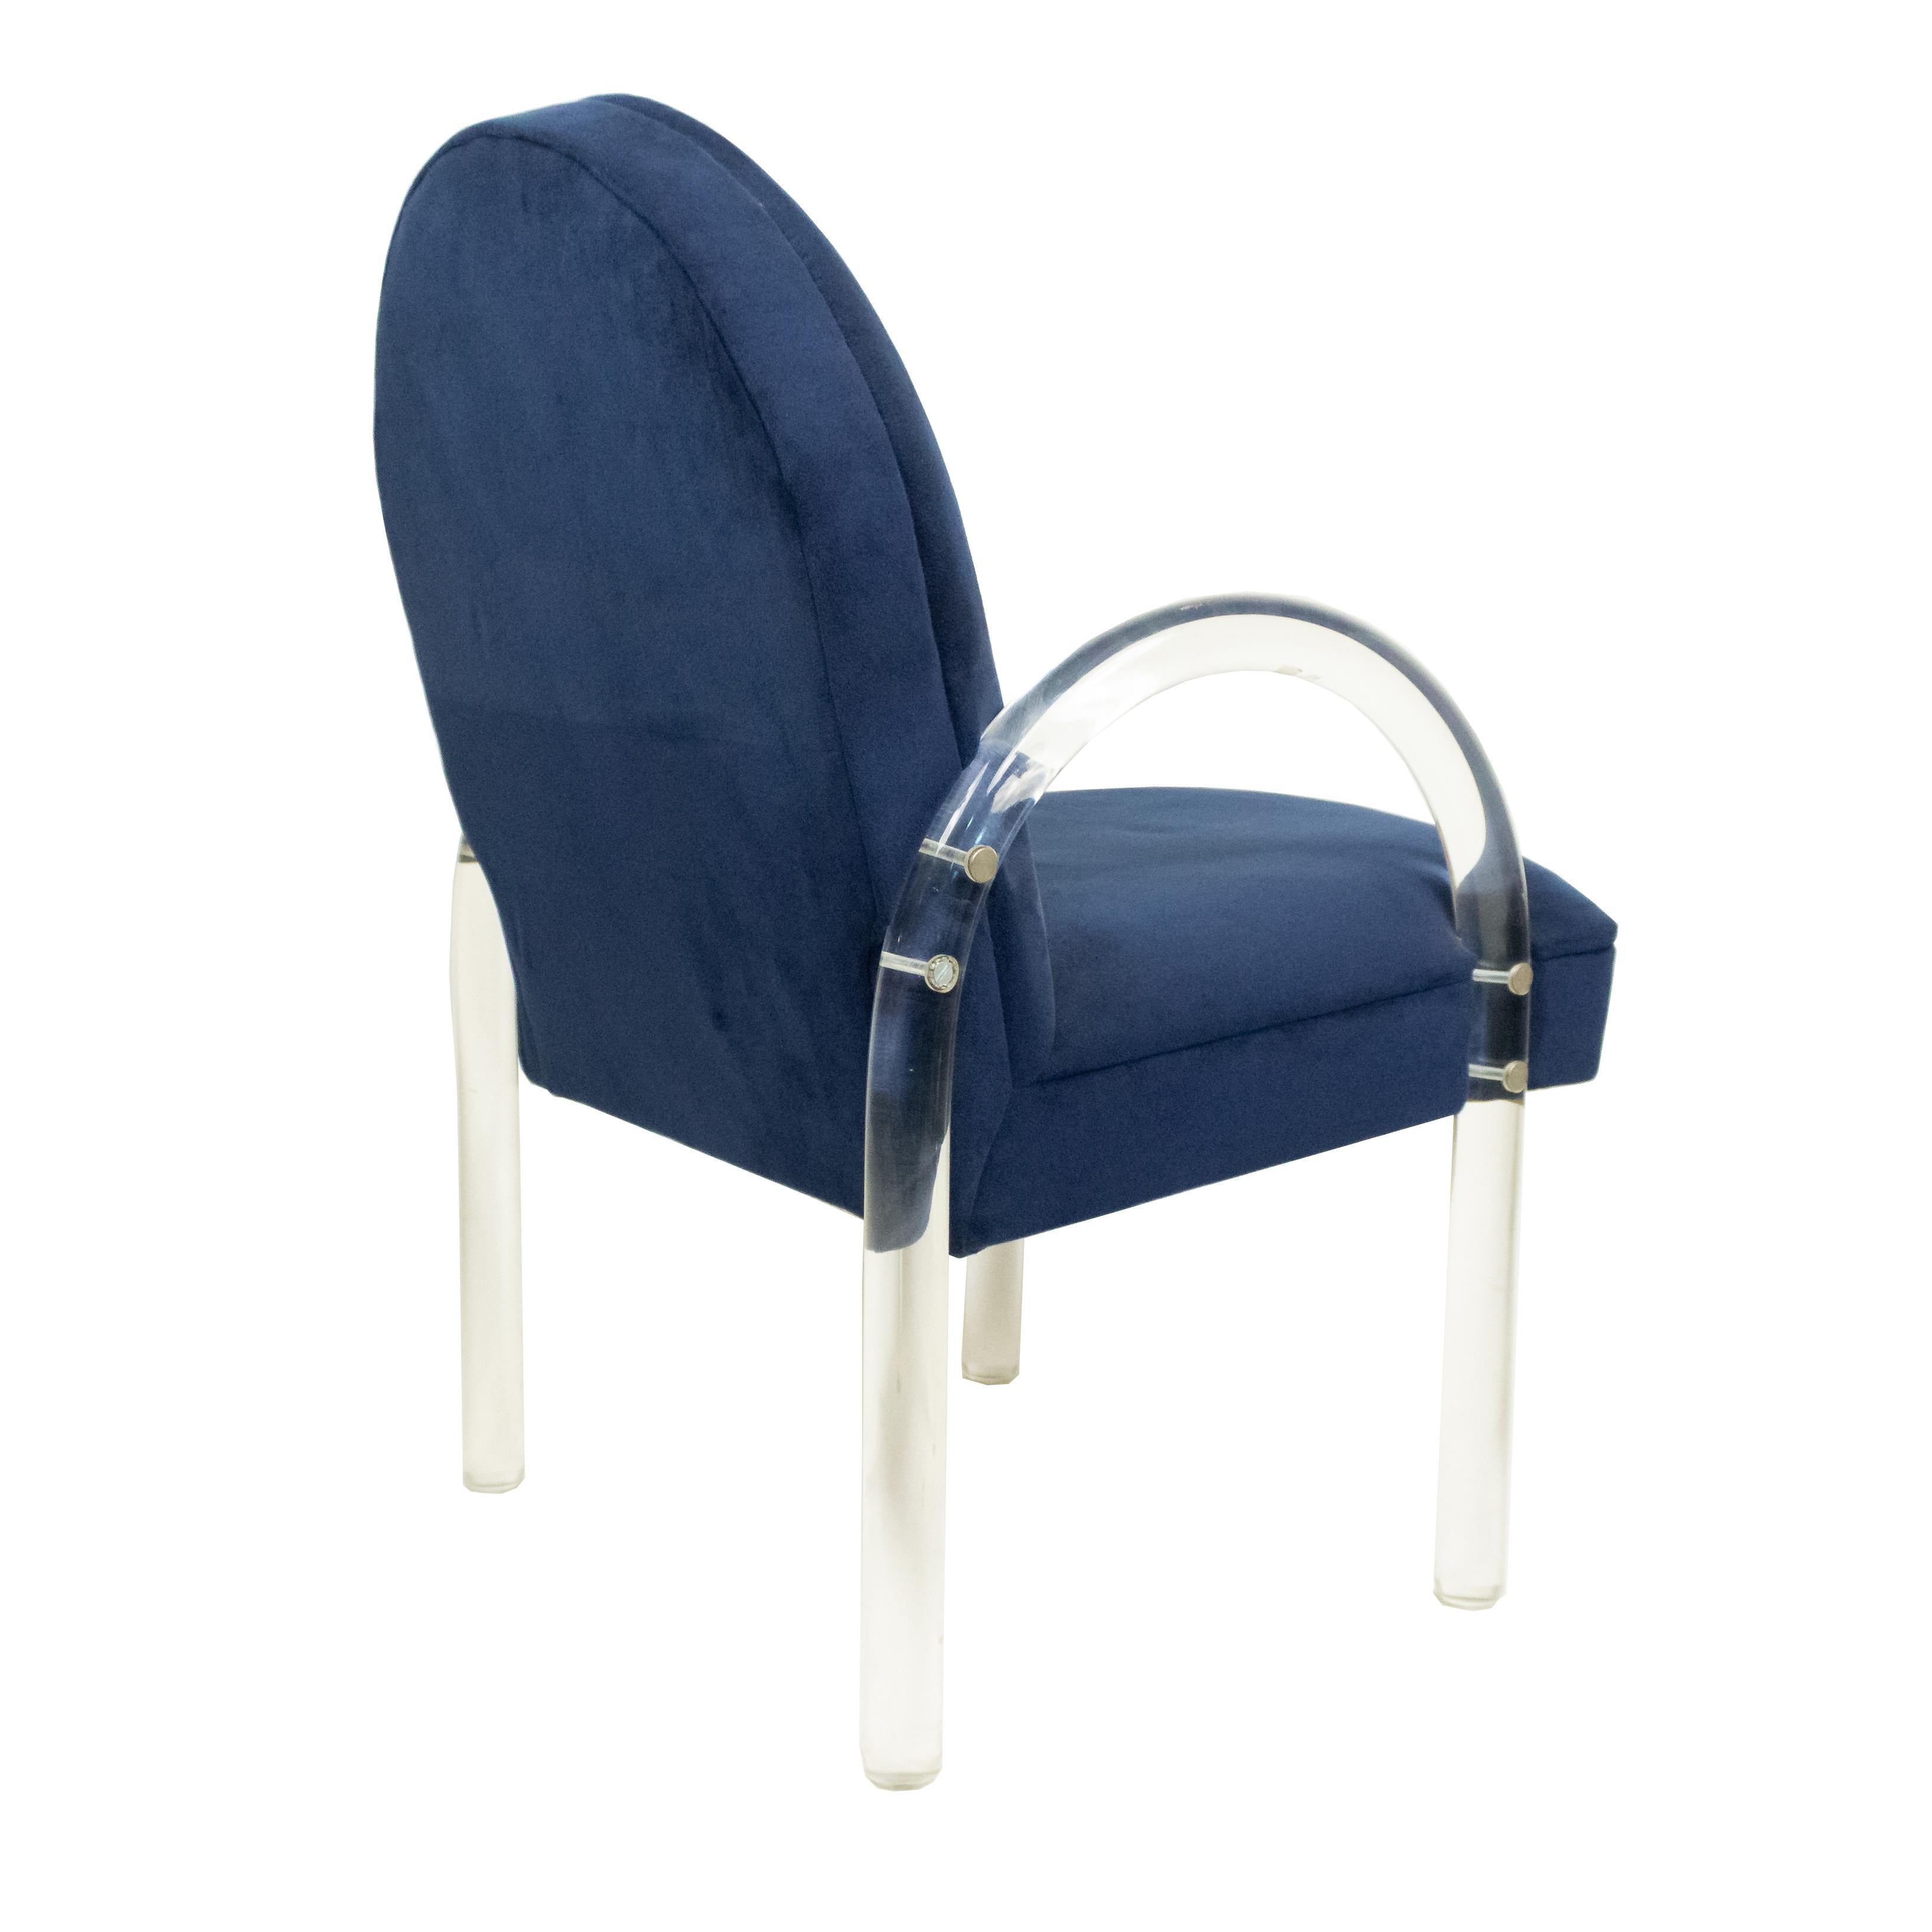 Pace Collection Lucite Waterfall Chairs with Blue Upholstery In Good Condition For Sale In New York, NY